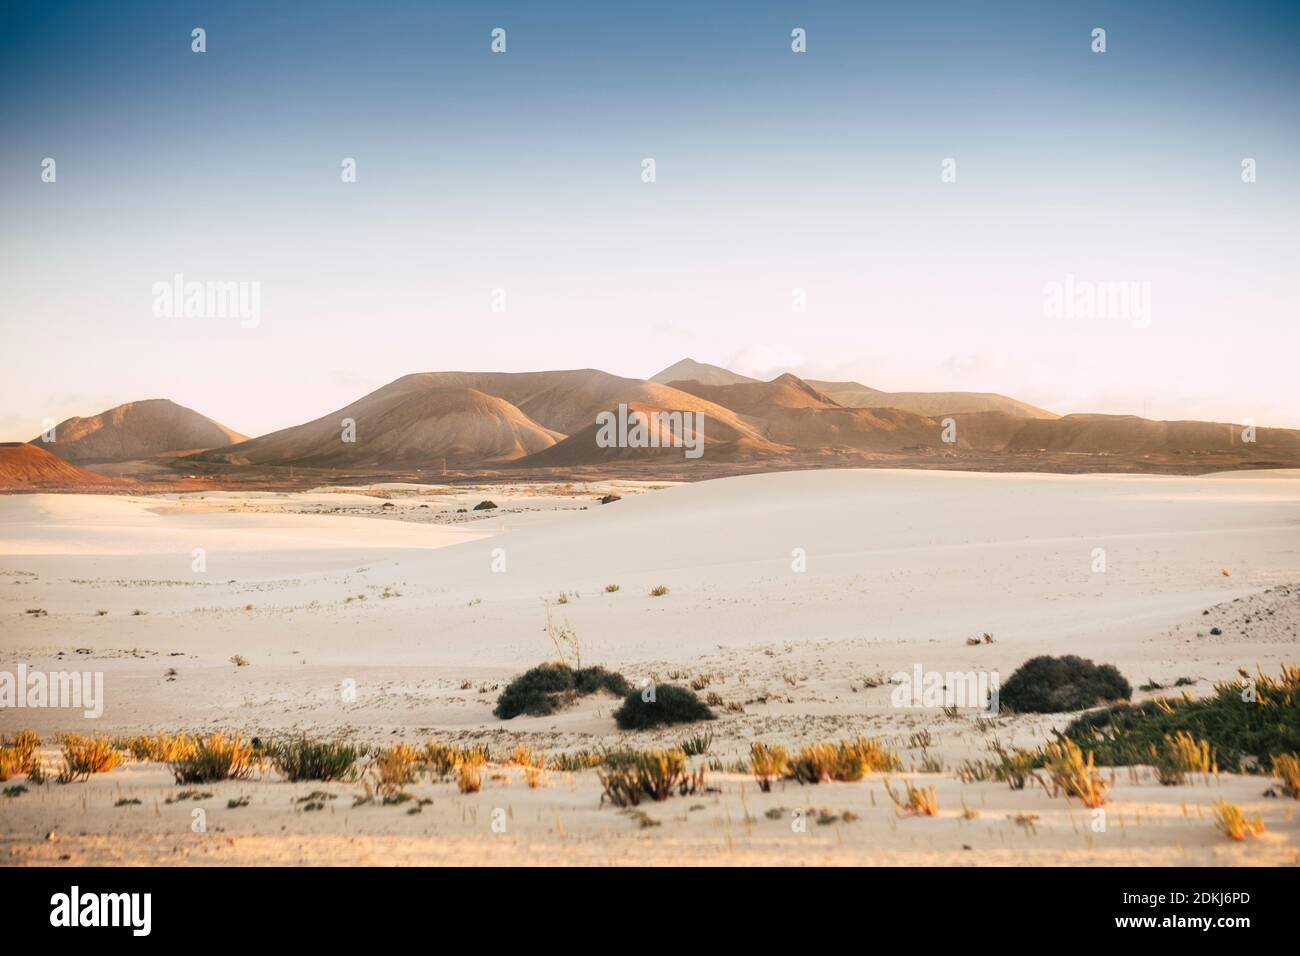 Desert landscape with mountains in background - concept of arid planet and global worming for weather change - blue sky and orange ground colors Stock Photo